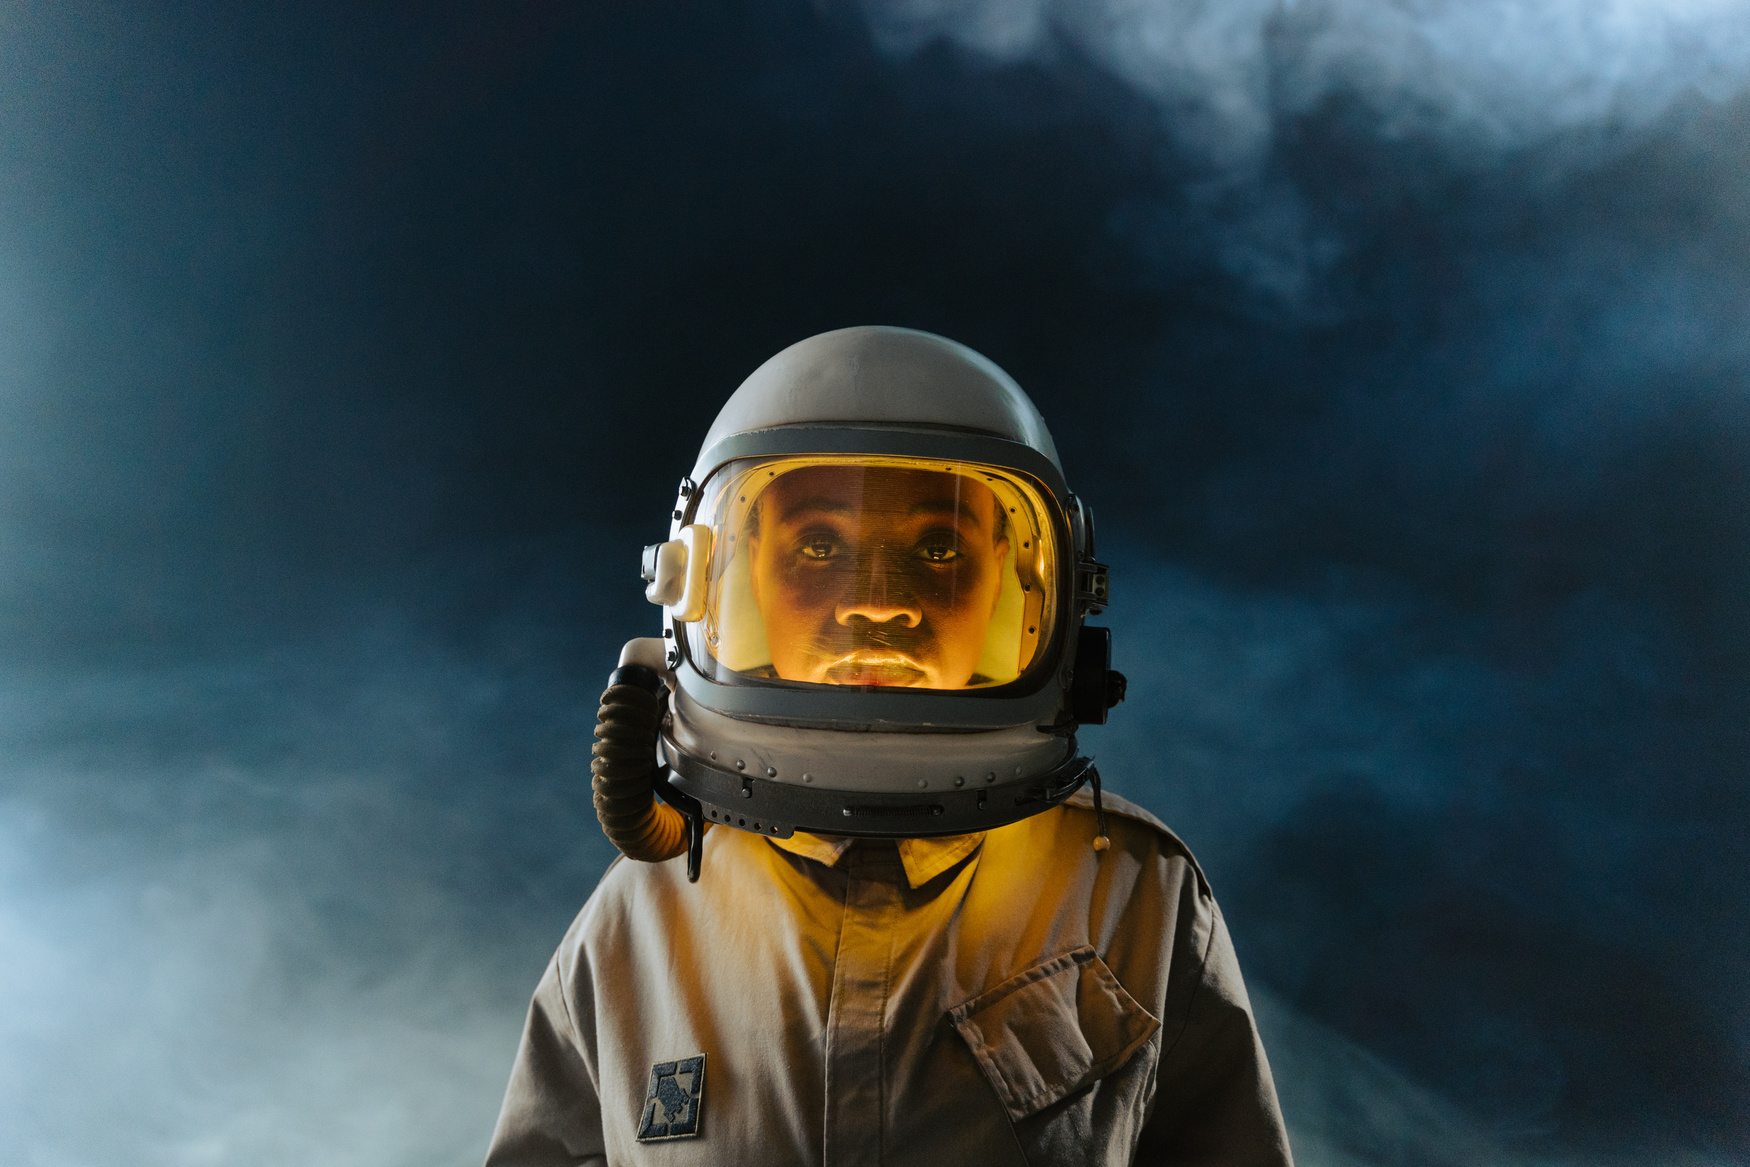 Man in White Helmet with Orange Light and Brown Space Suit  in Outerspace